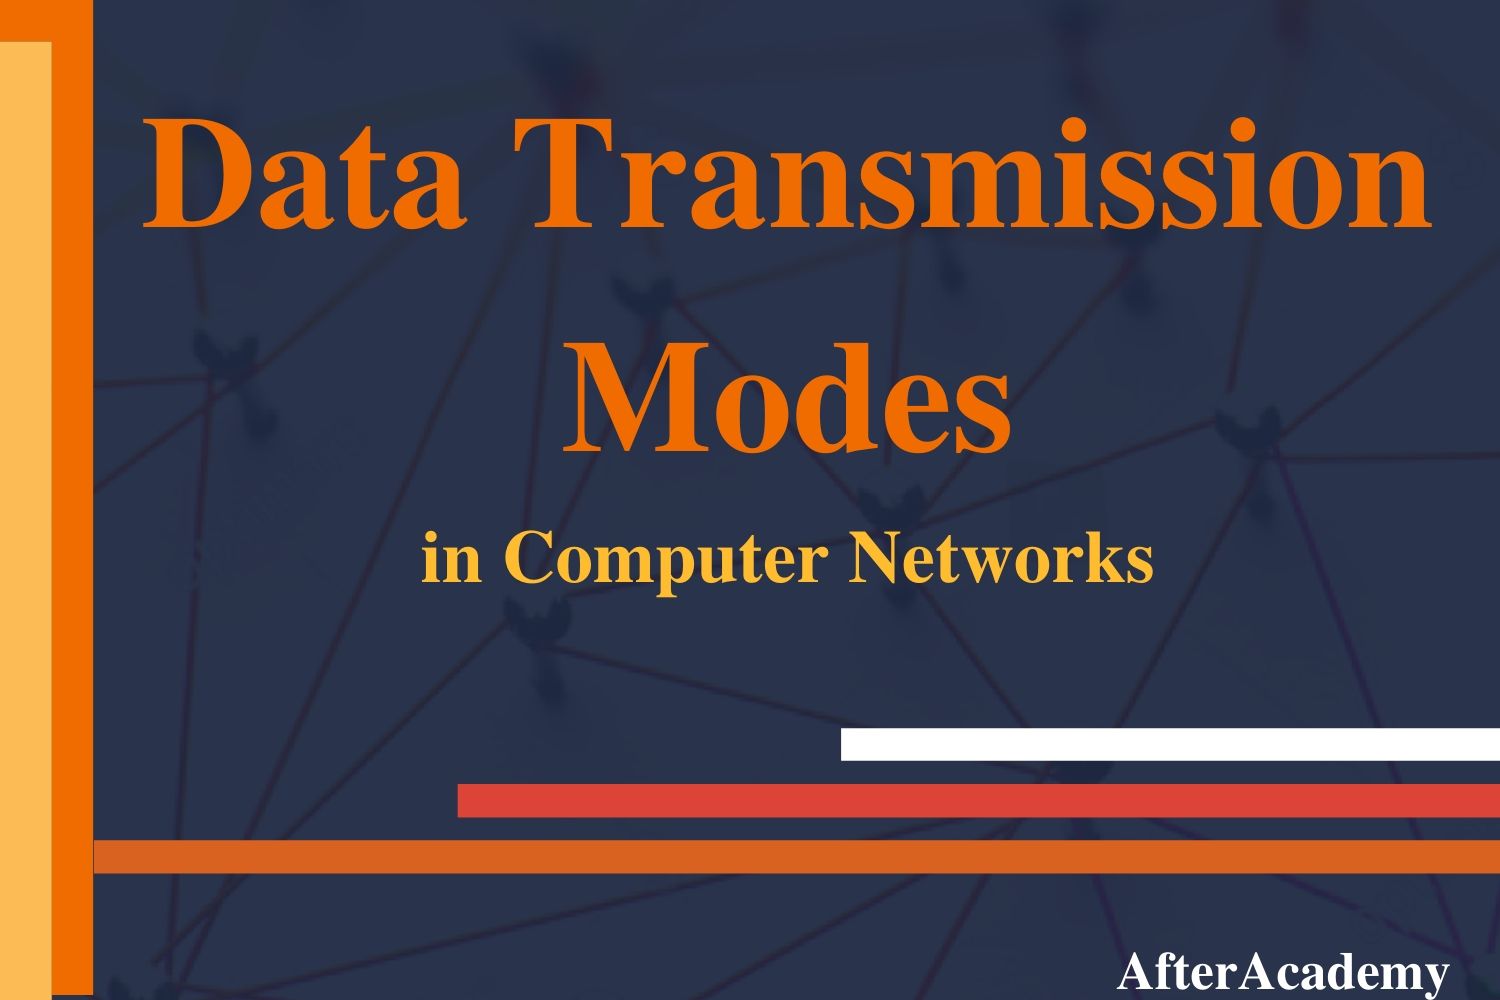 What are the Data Transmission Modes in a network?